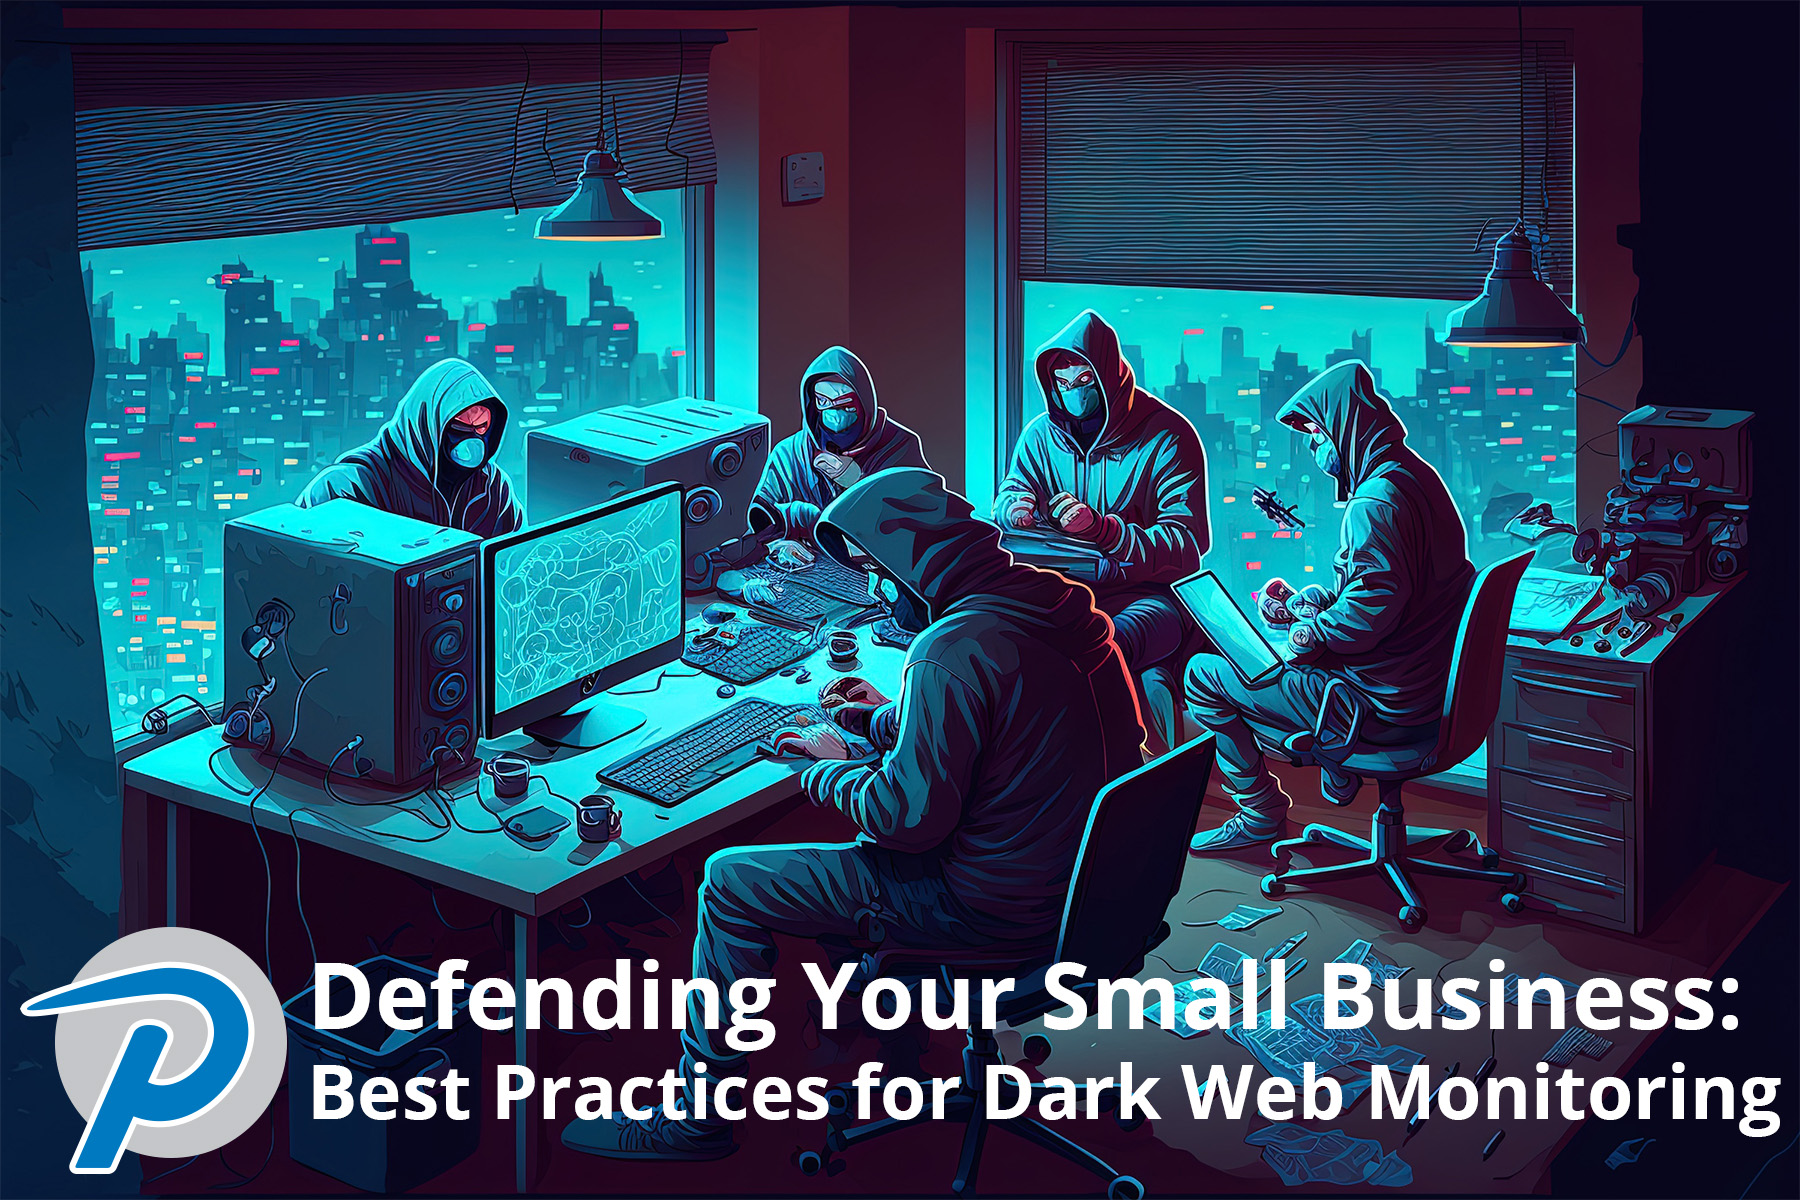 Defending Your Small Business Best Practices for Dark Web Monitoring